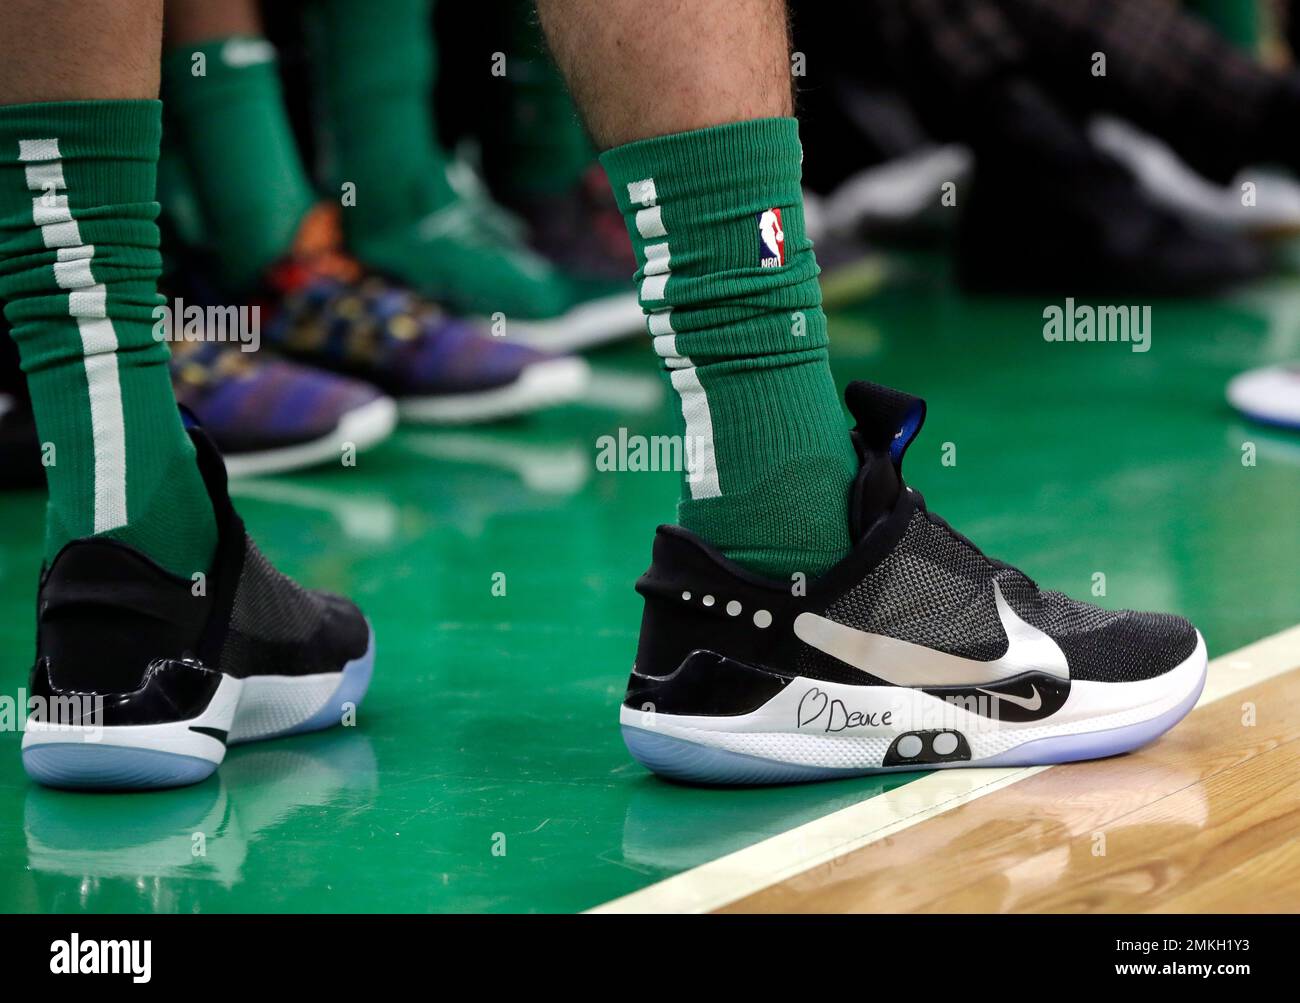 In this Feb. 7, 2019 photo, Boston Celtics forward Tatum stands the bench area during an basketball game against the Los Angeles Lakers in Boston. He is wearing